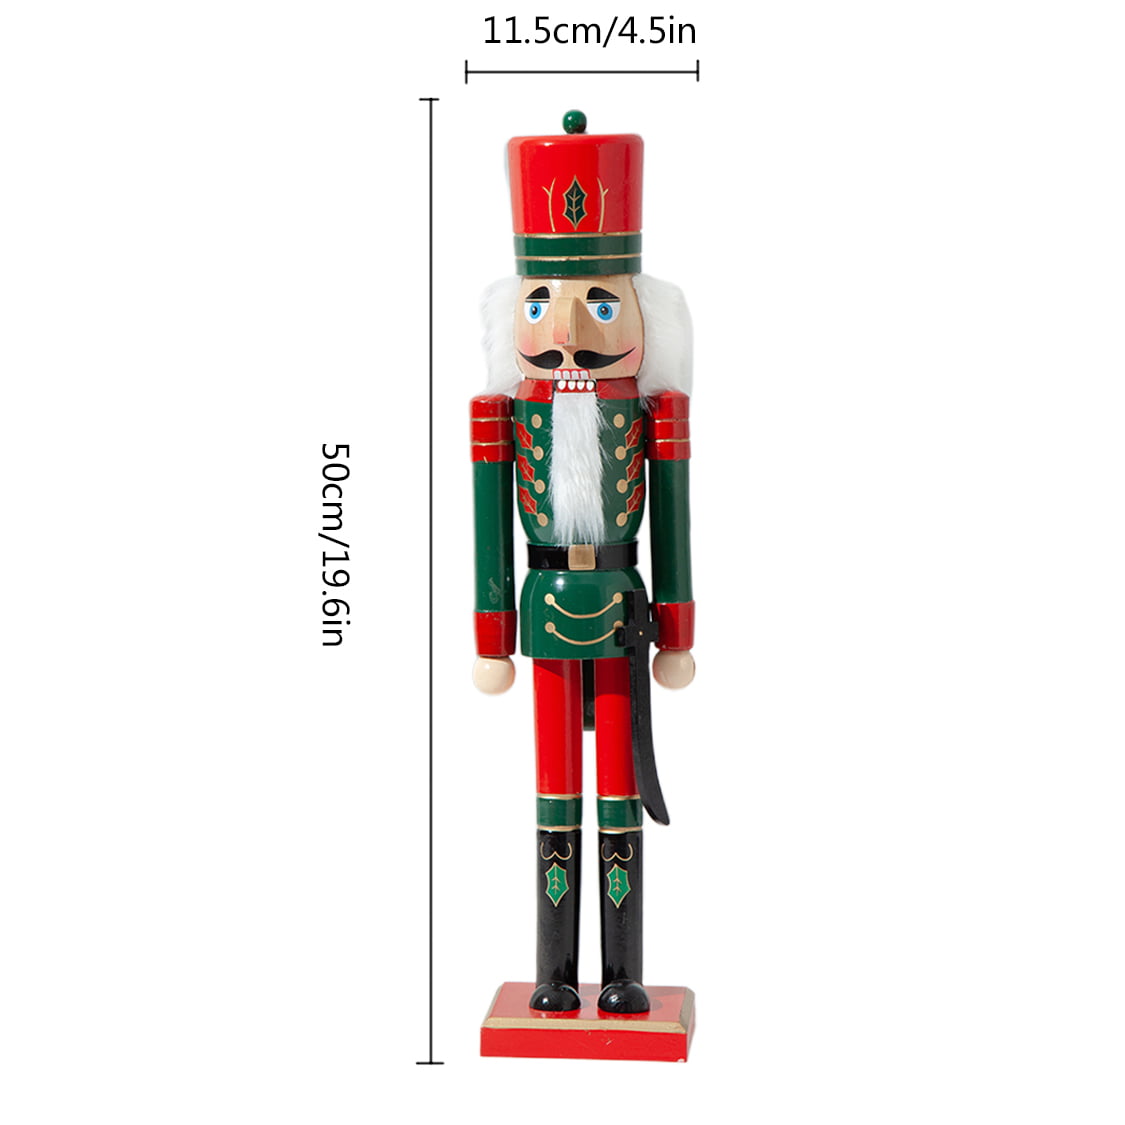 CampHiking Nutcracker Christmas Decorations,38CM/50CM Large Christmas Nutcracker Soldier/Drummer/King Wooden Ornaments Gifts Toys For Childrens Kid Room Home Decor 